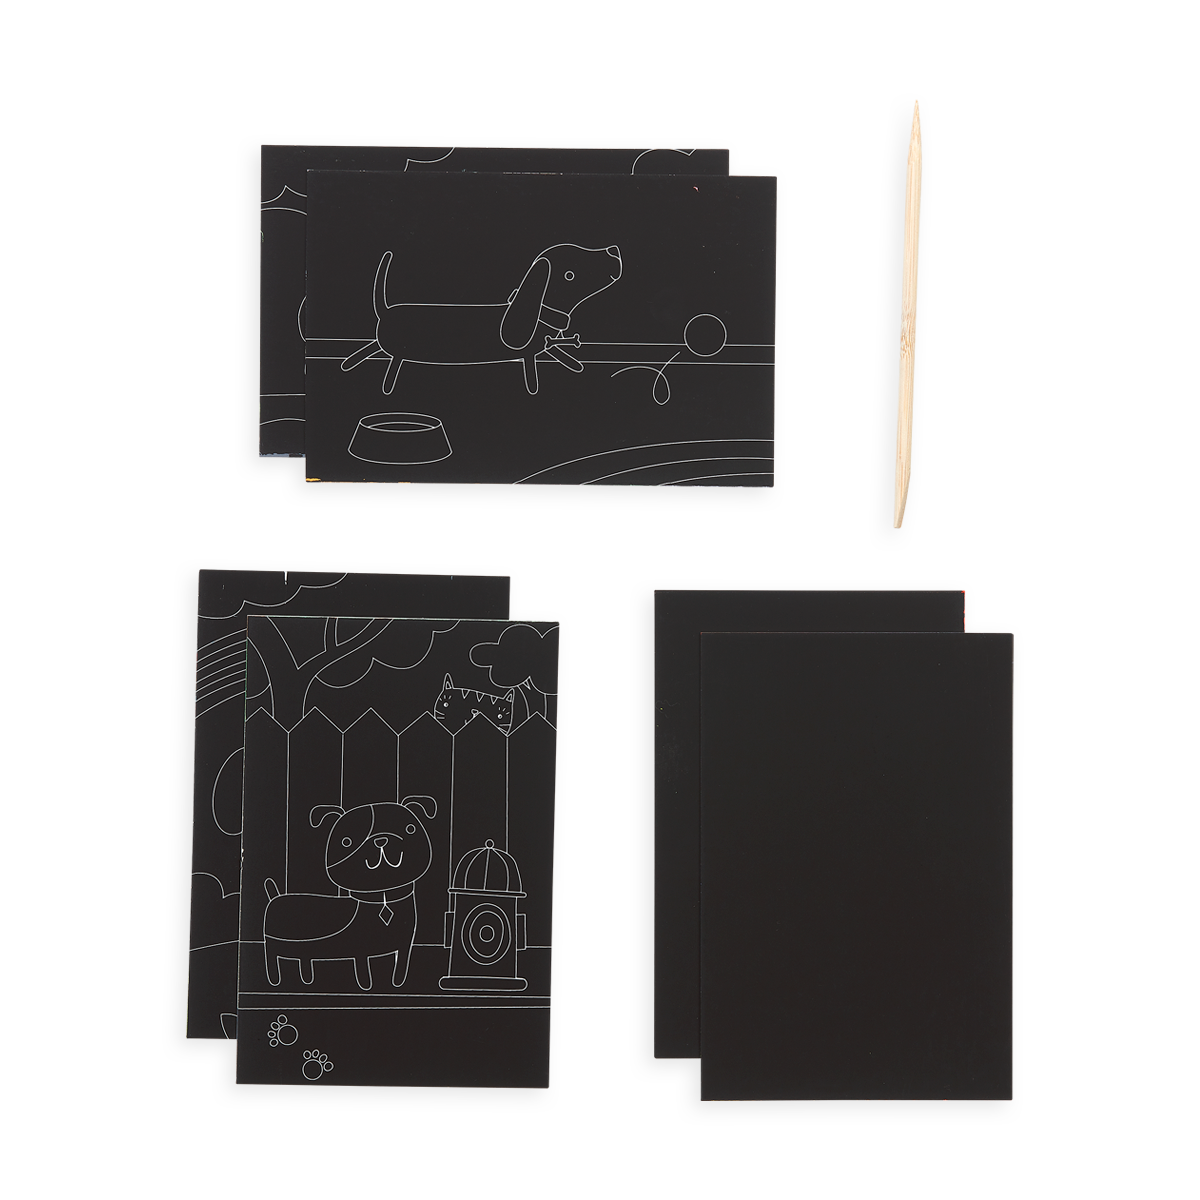 Playful Pups Scratch and Scribble Mini Scratch Art Kit content which includes 6 sheets and a wooden stylus.